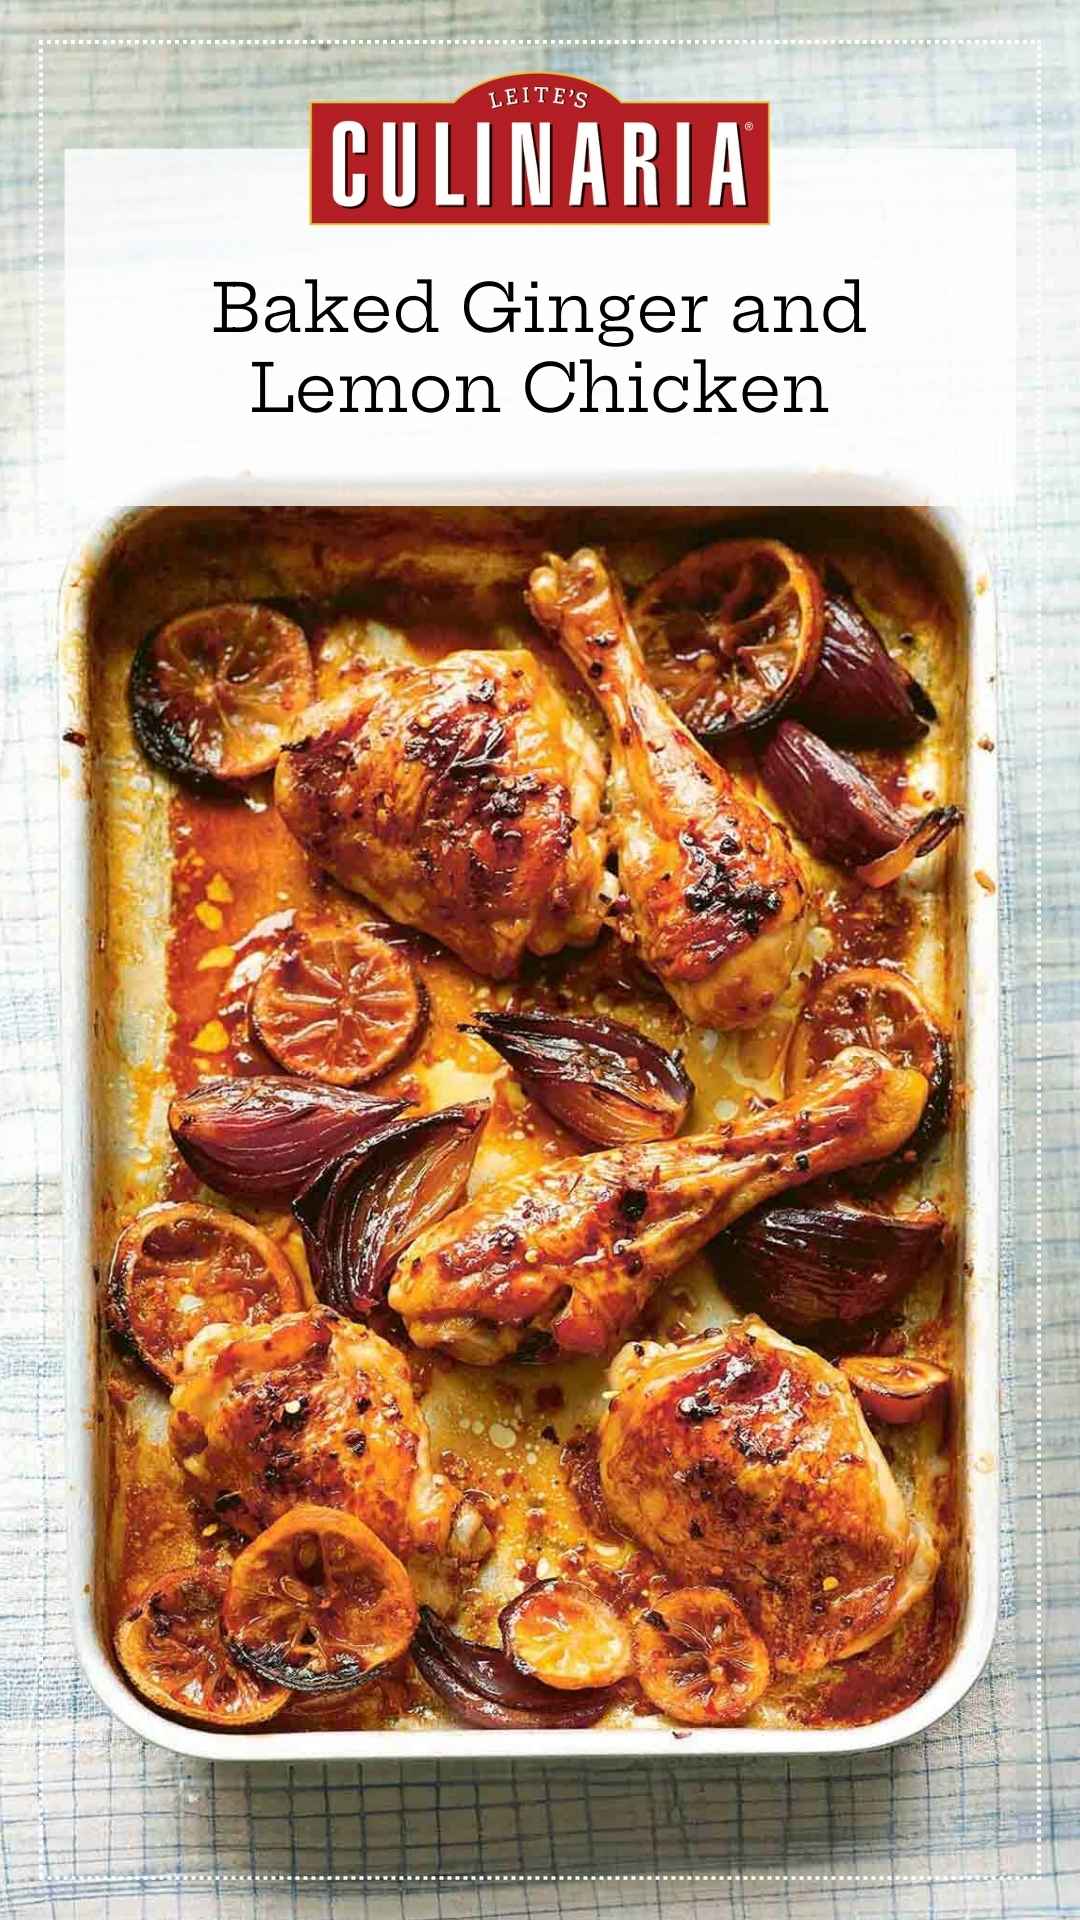 Baked chicken pieces in a baking dish with red onion wedges and lemon slices.